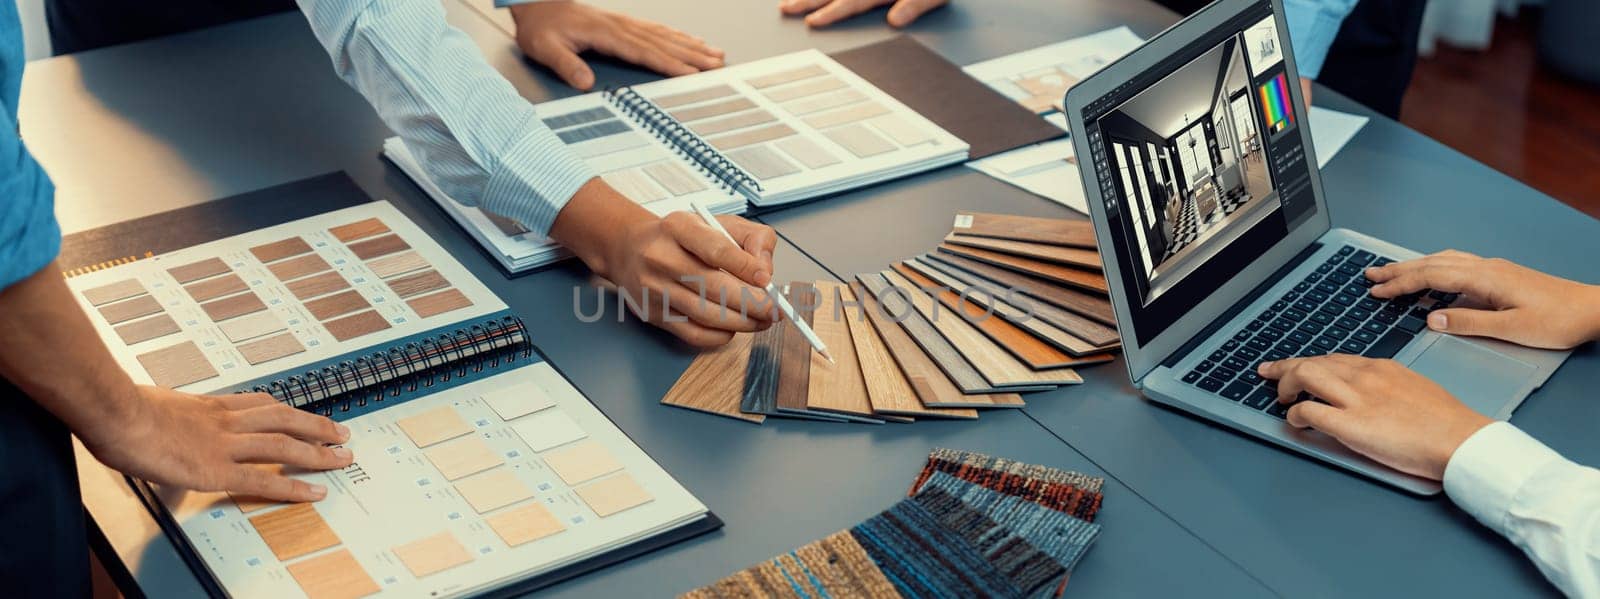 Group of interior architect designer team at table choosing various mood board samples with architecture software on laptop screen. Modern renovation and interior material selection concept. Insight